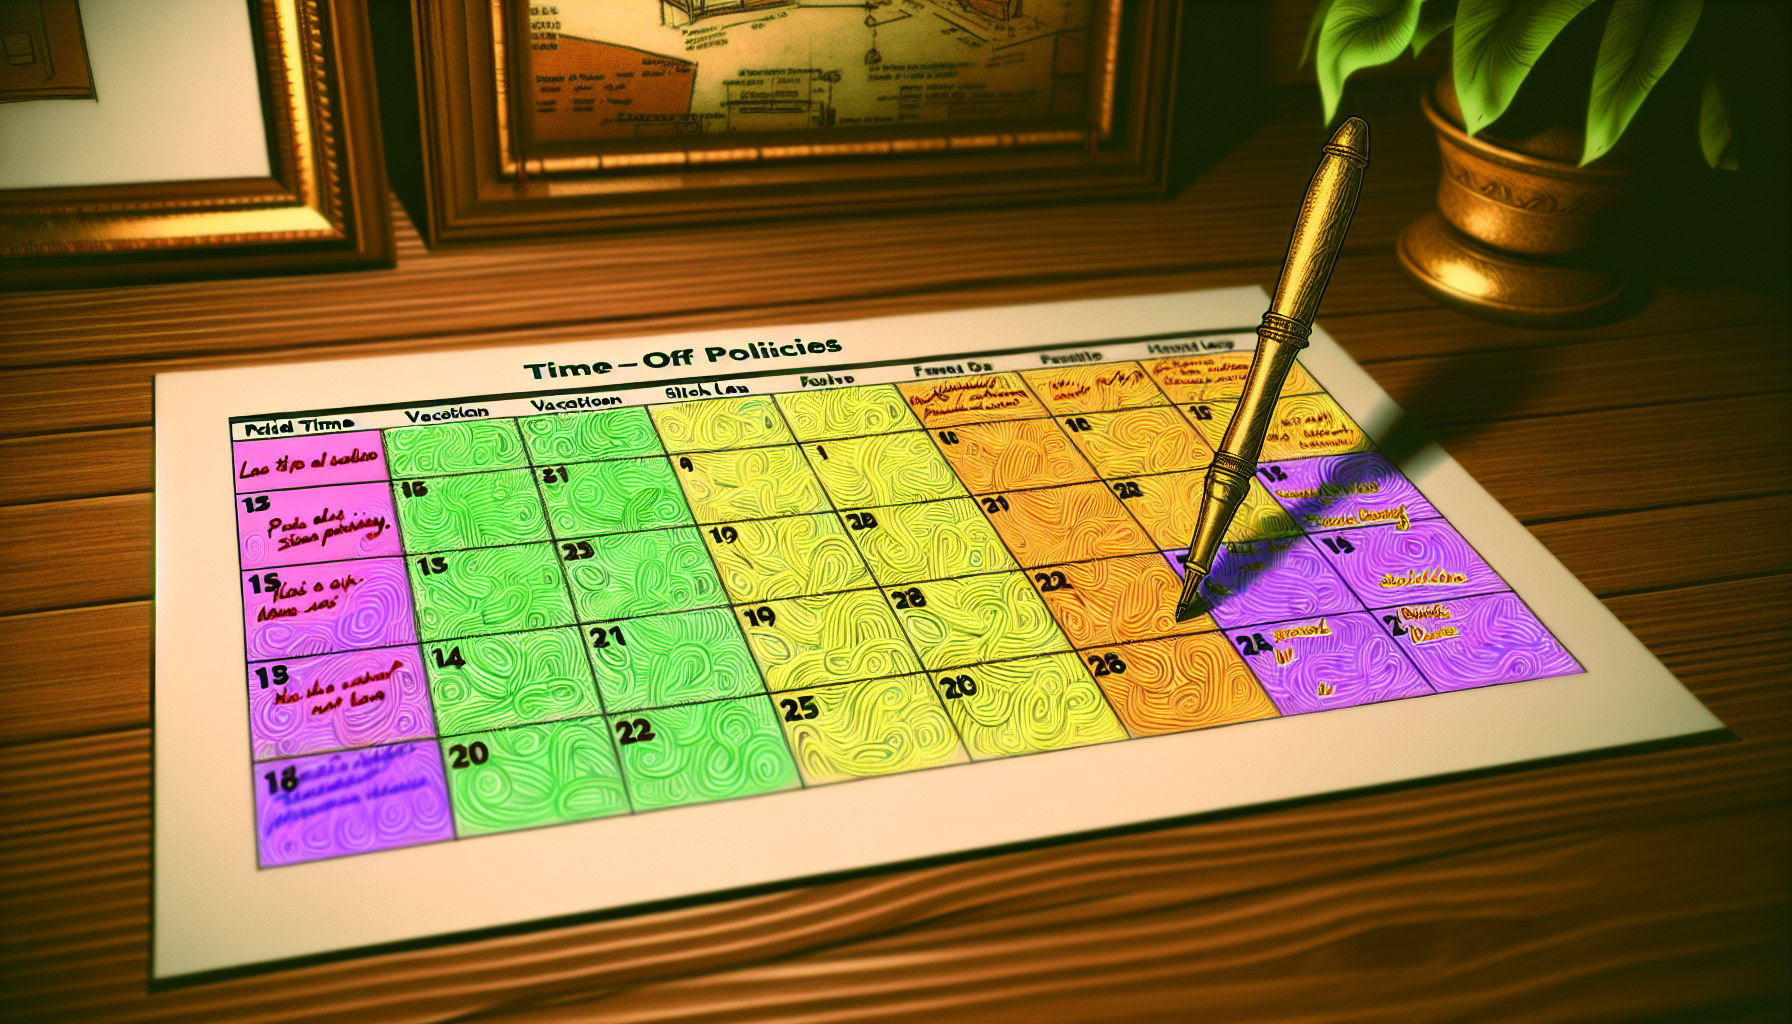 Calendar with marked holidays and vacation days